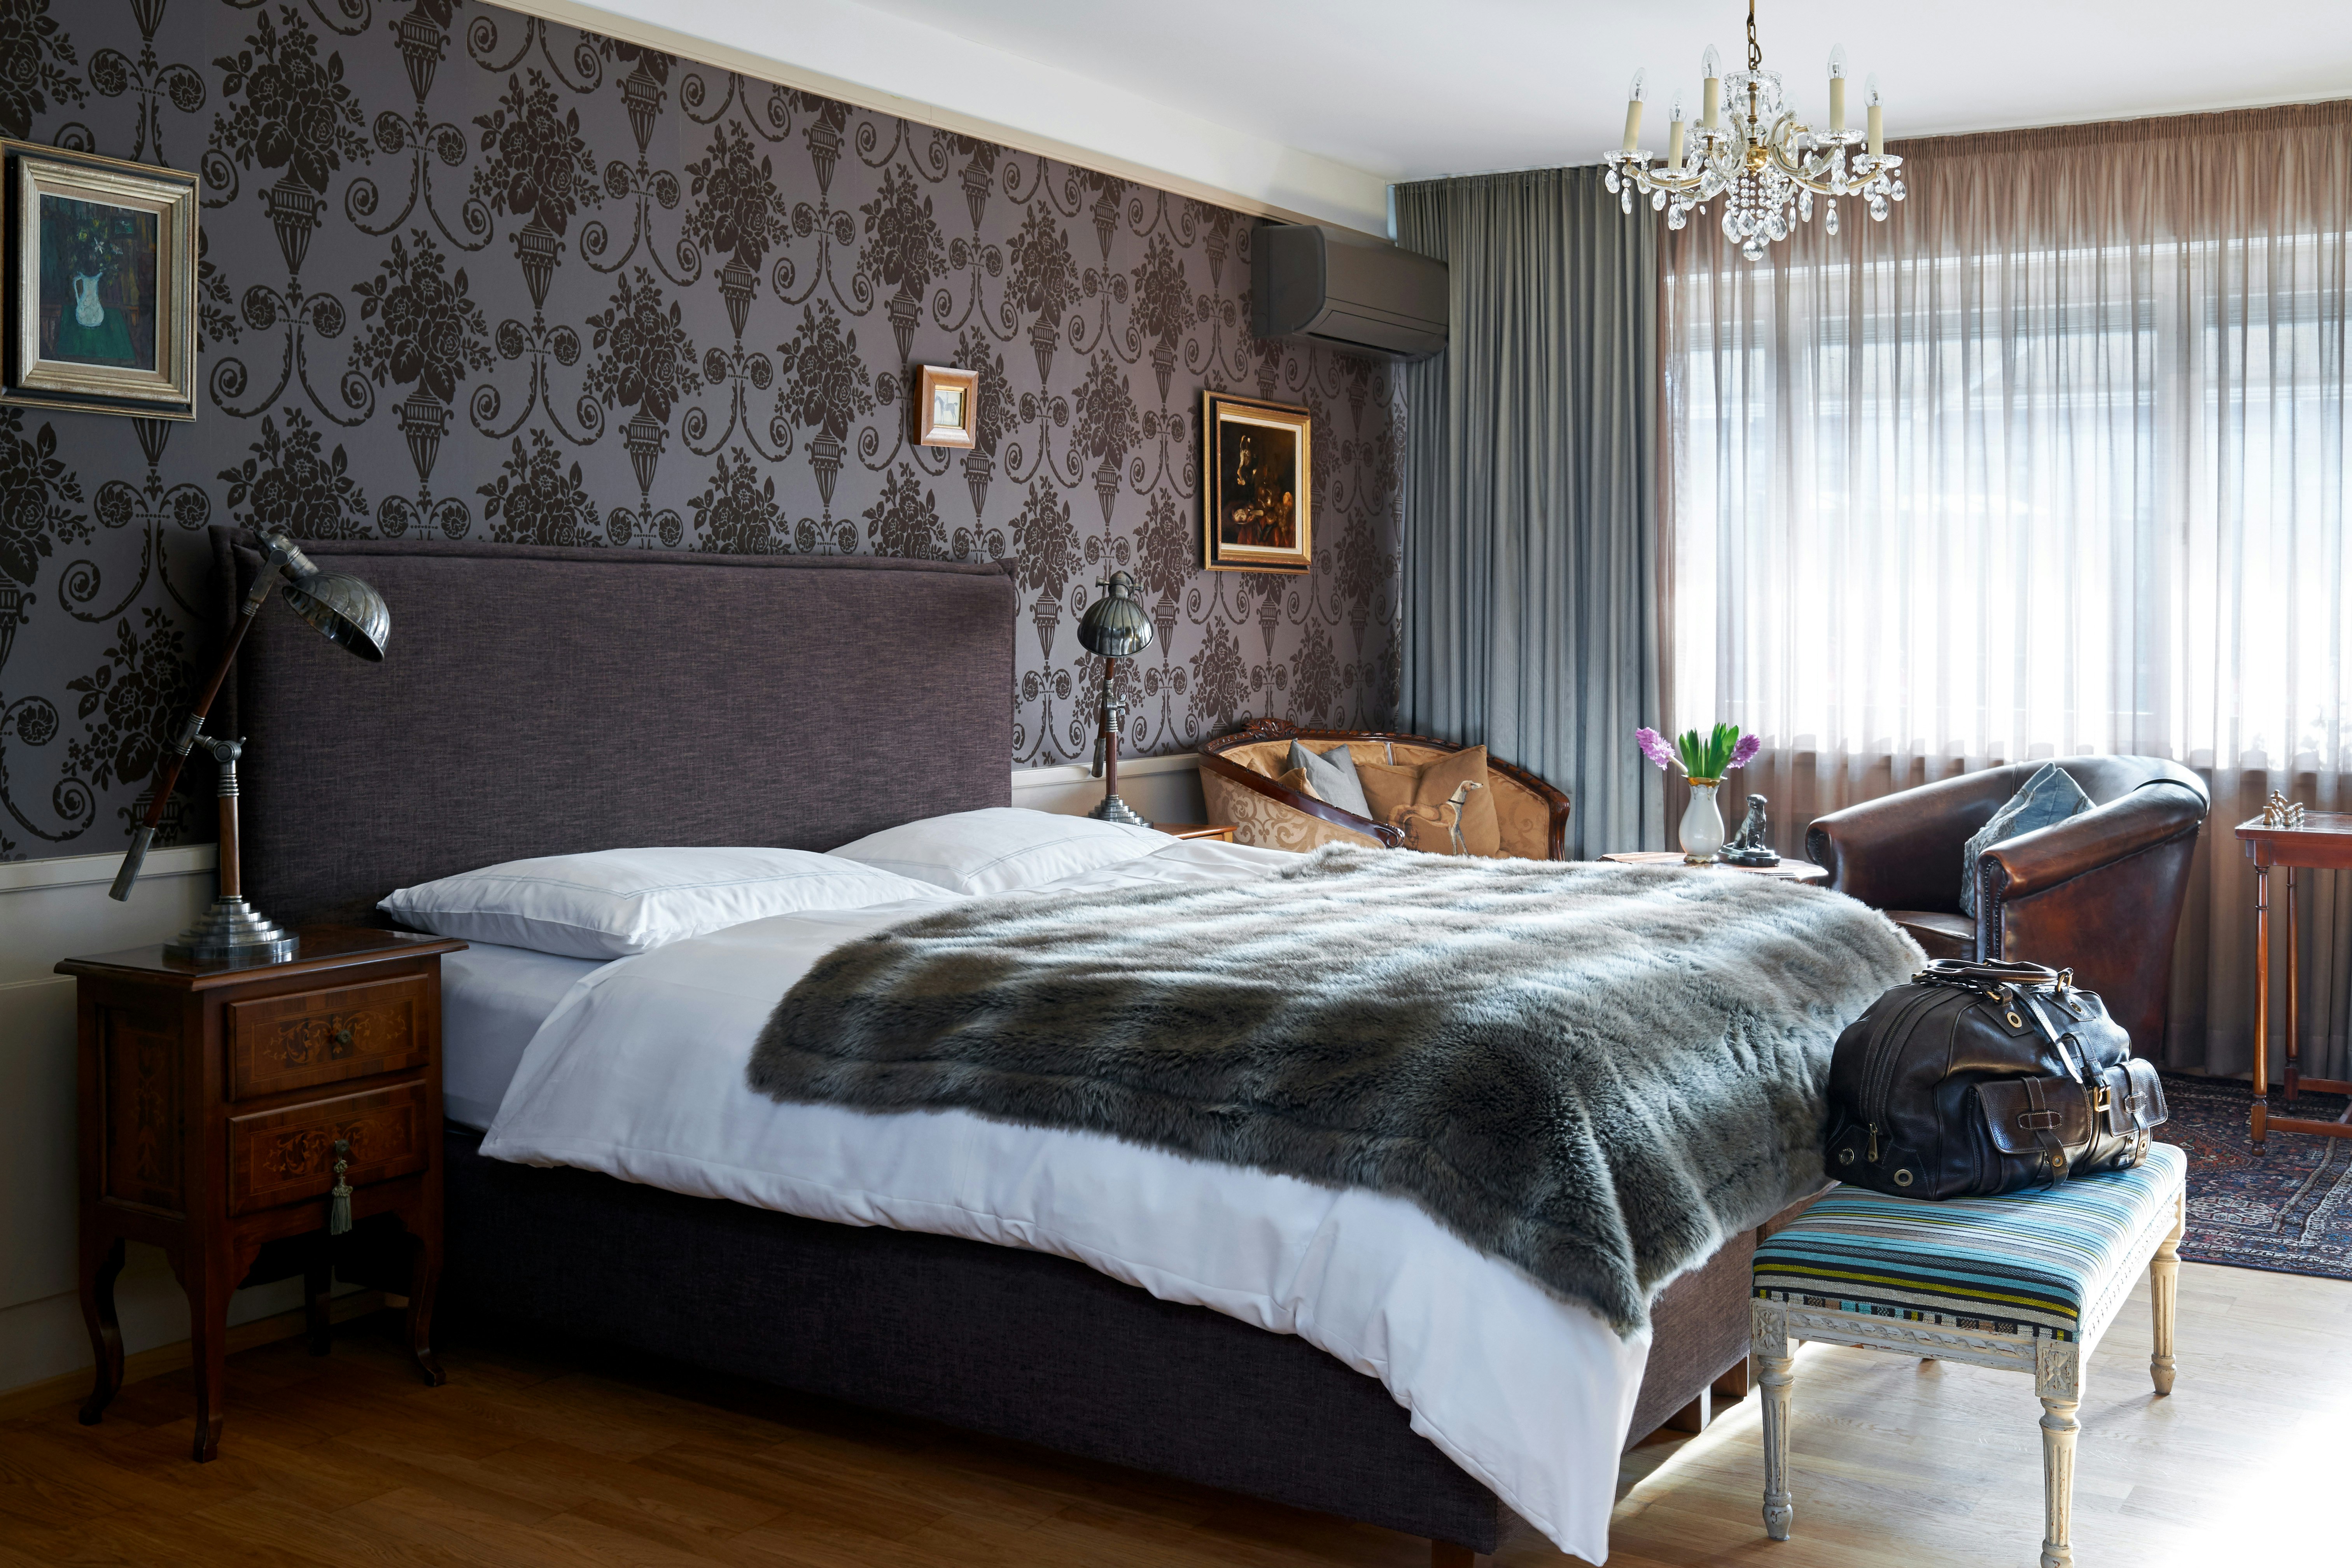 Accommodation voucher - redeemable in a Zurich City Hotel of your choice